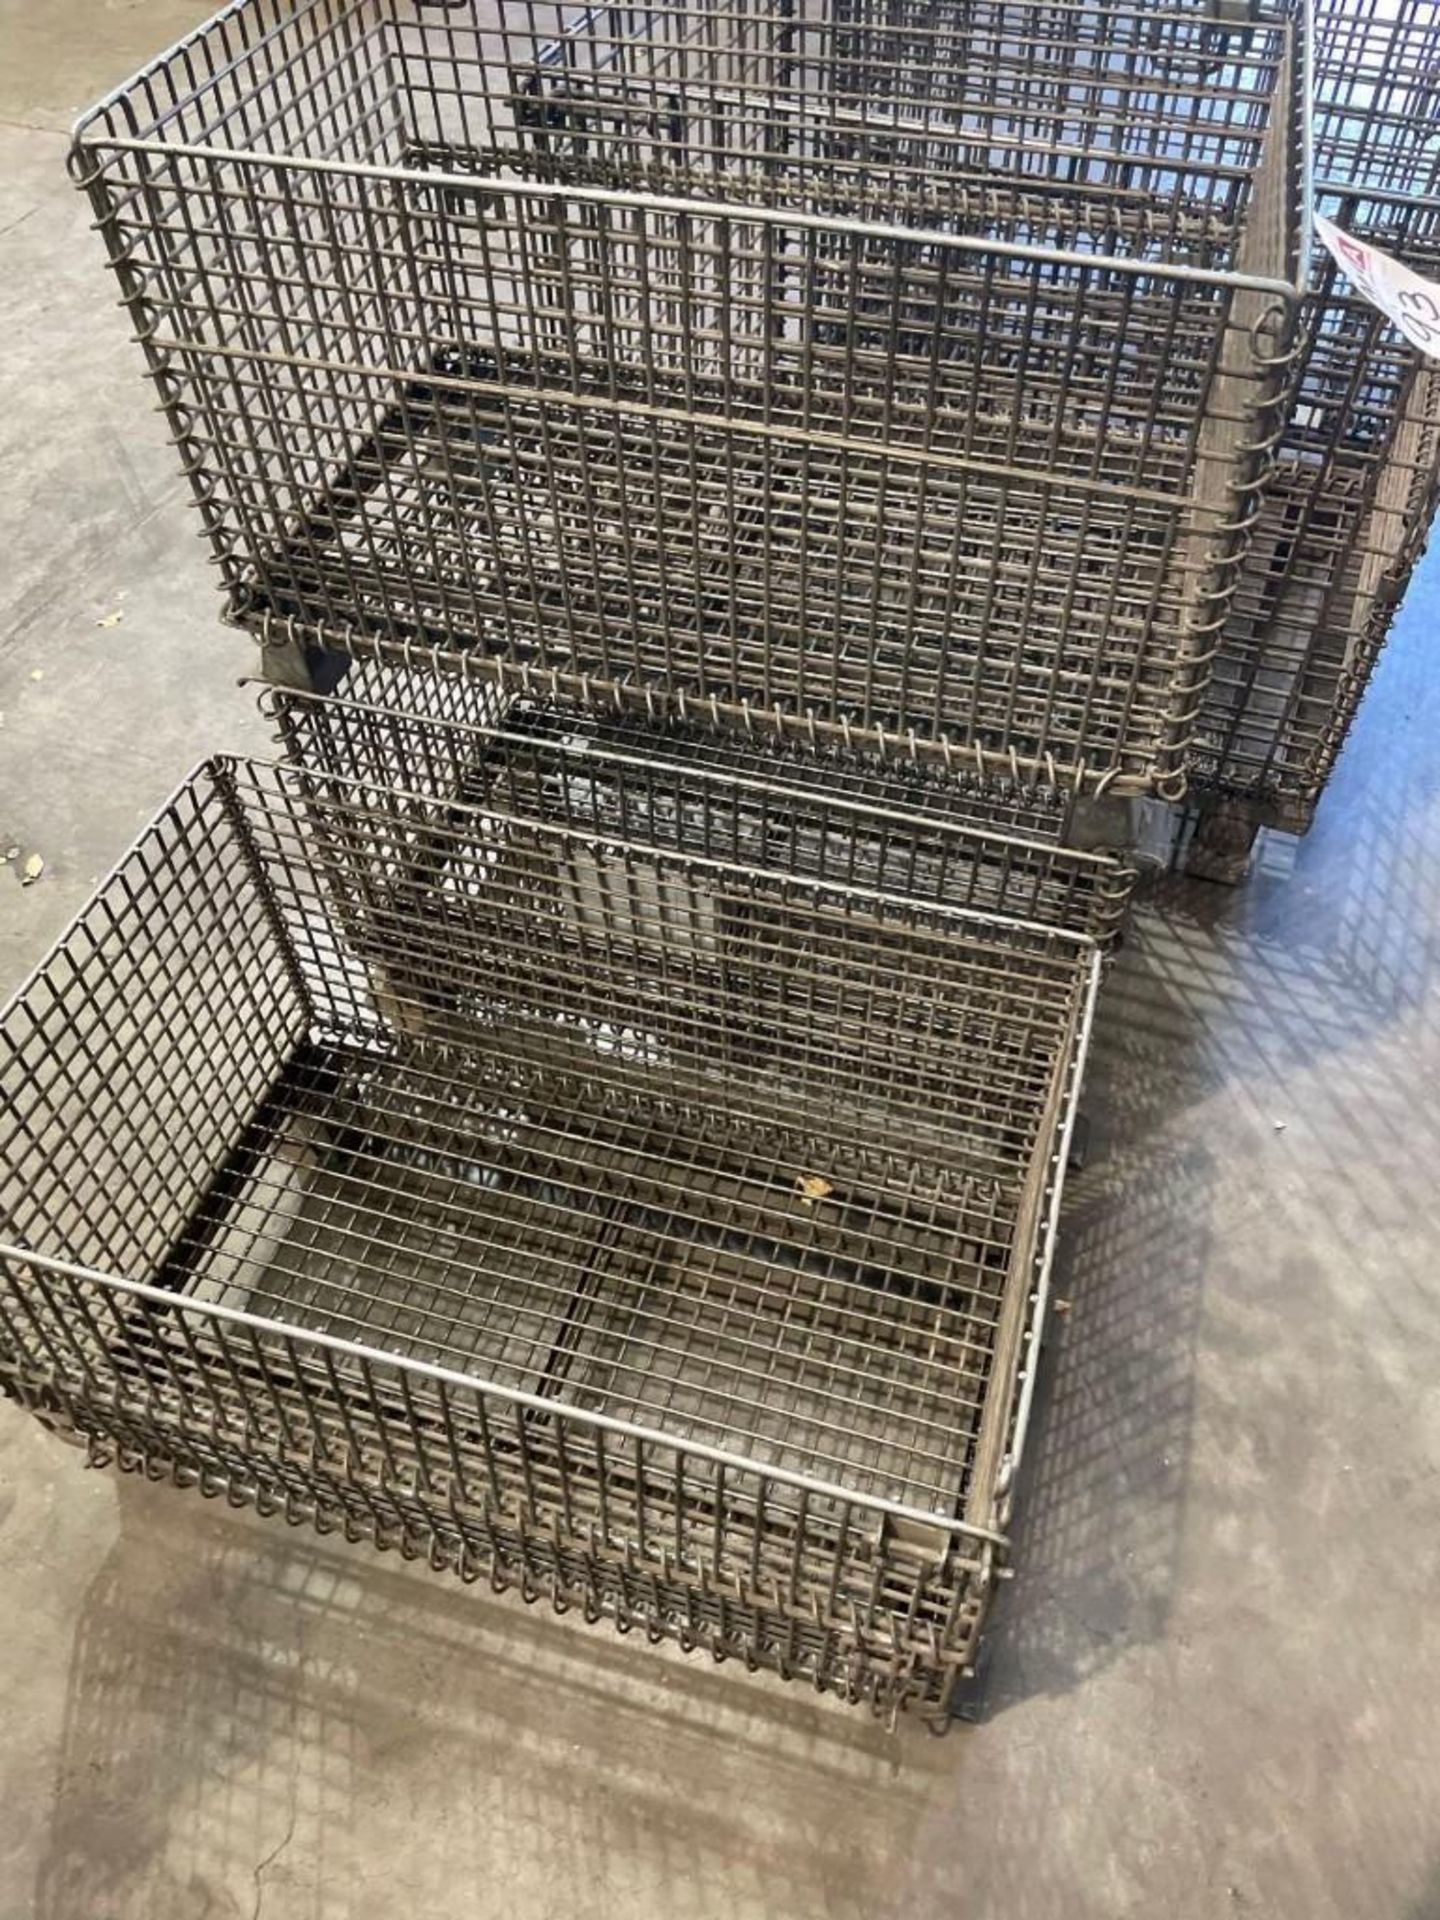 (10) 20" x 32" x 16" Wire Transport Baskets - Image 3 of 3